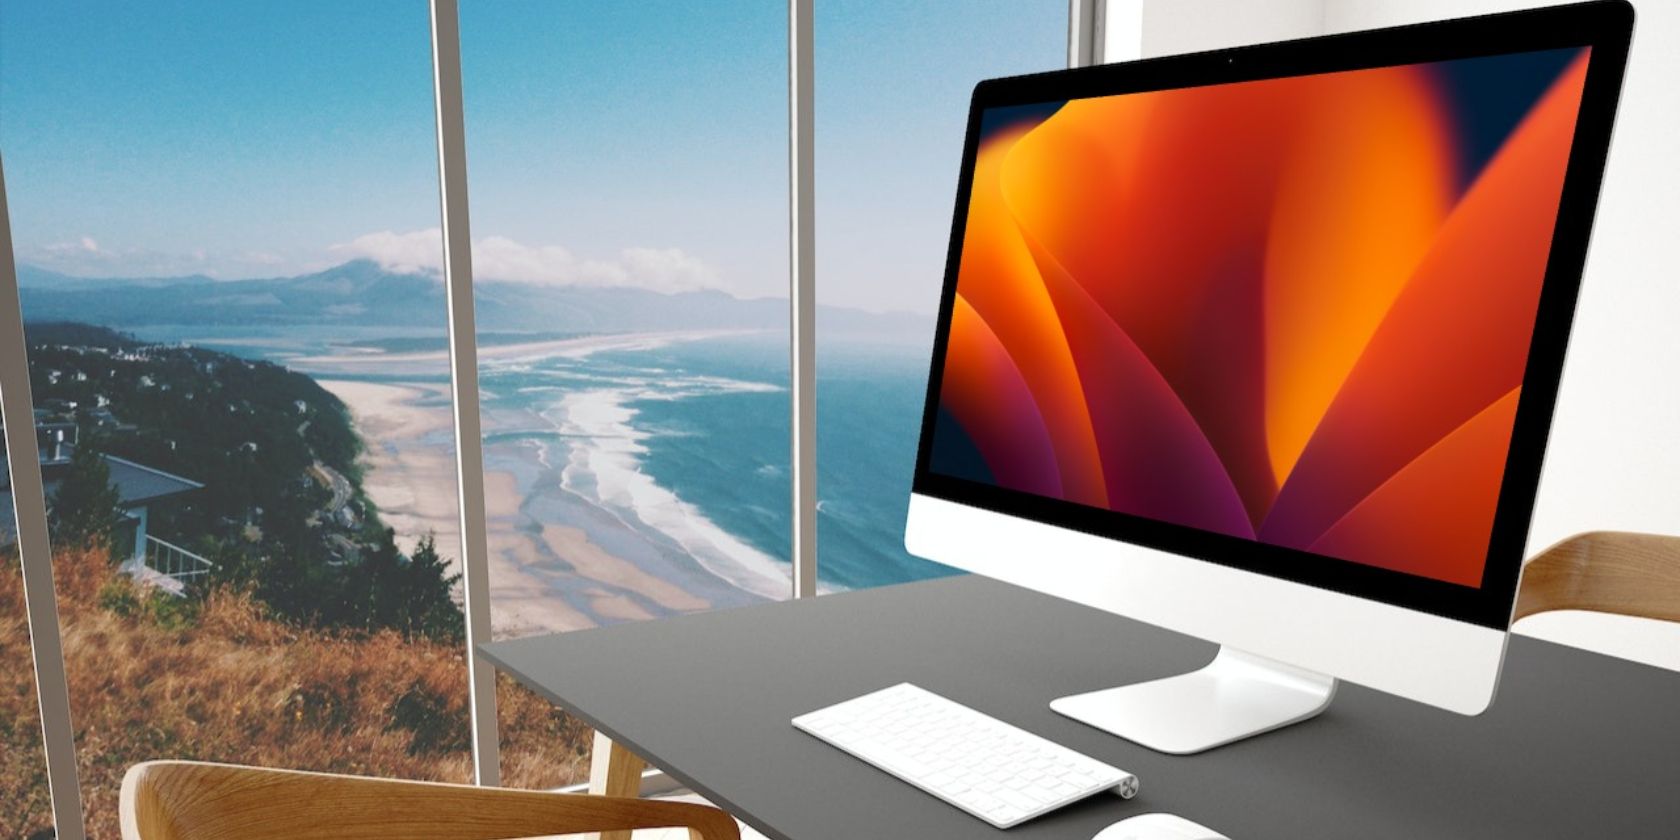 iMac on a table with a view of the beach